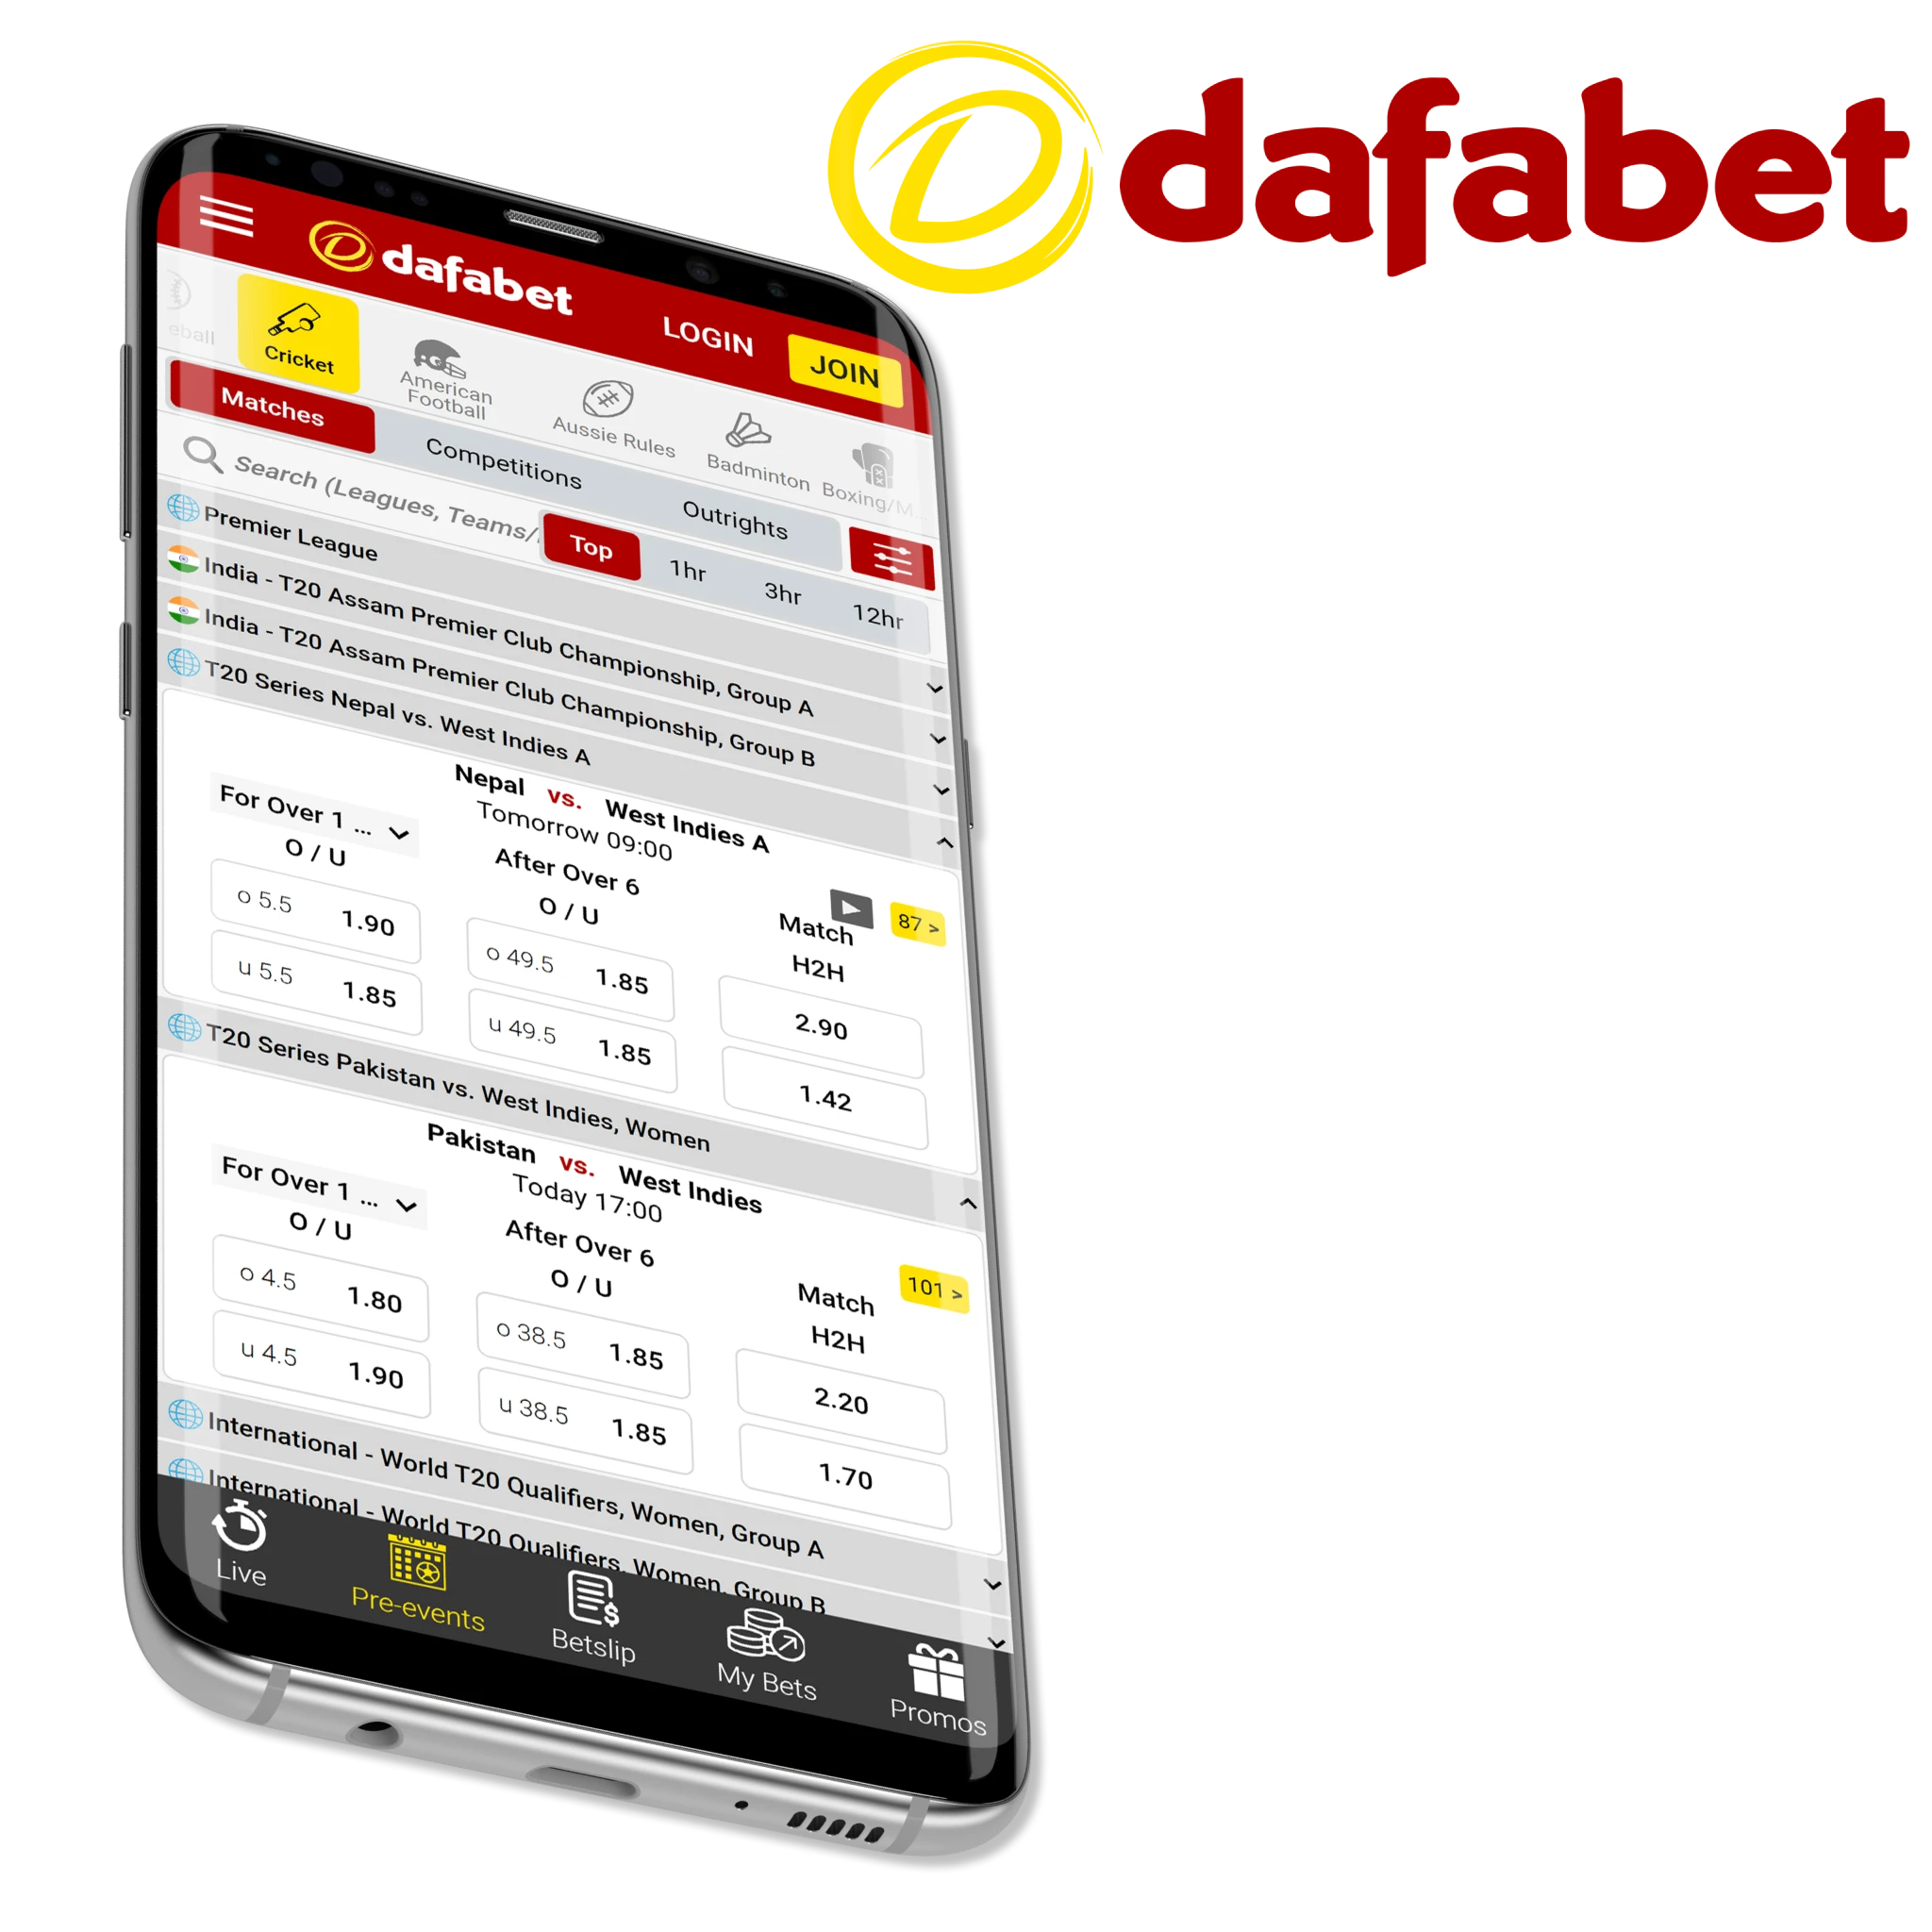 By installing the Dafabet app you will forever get permanent access to cricket betting on extremely favorable conditions, especially when participating in bonus offers.